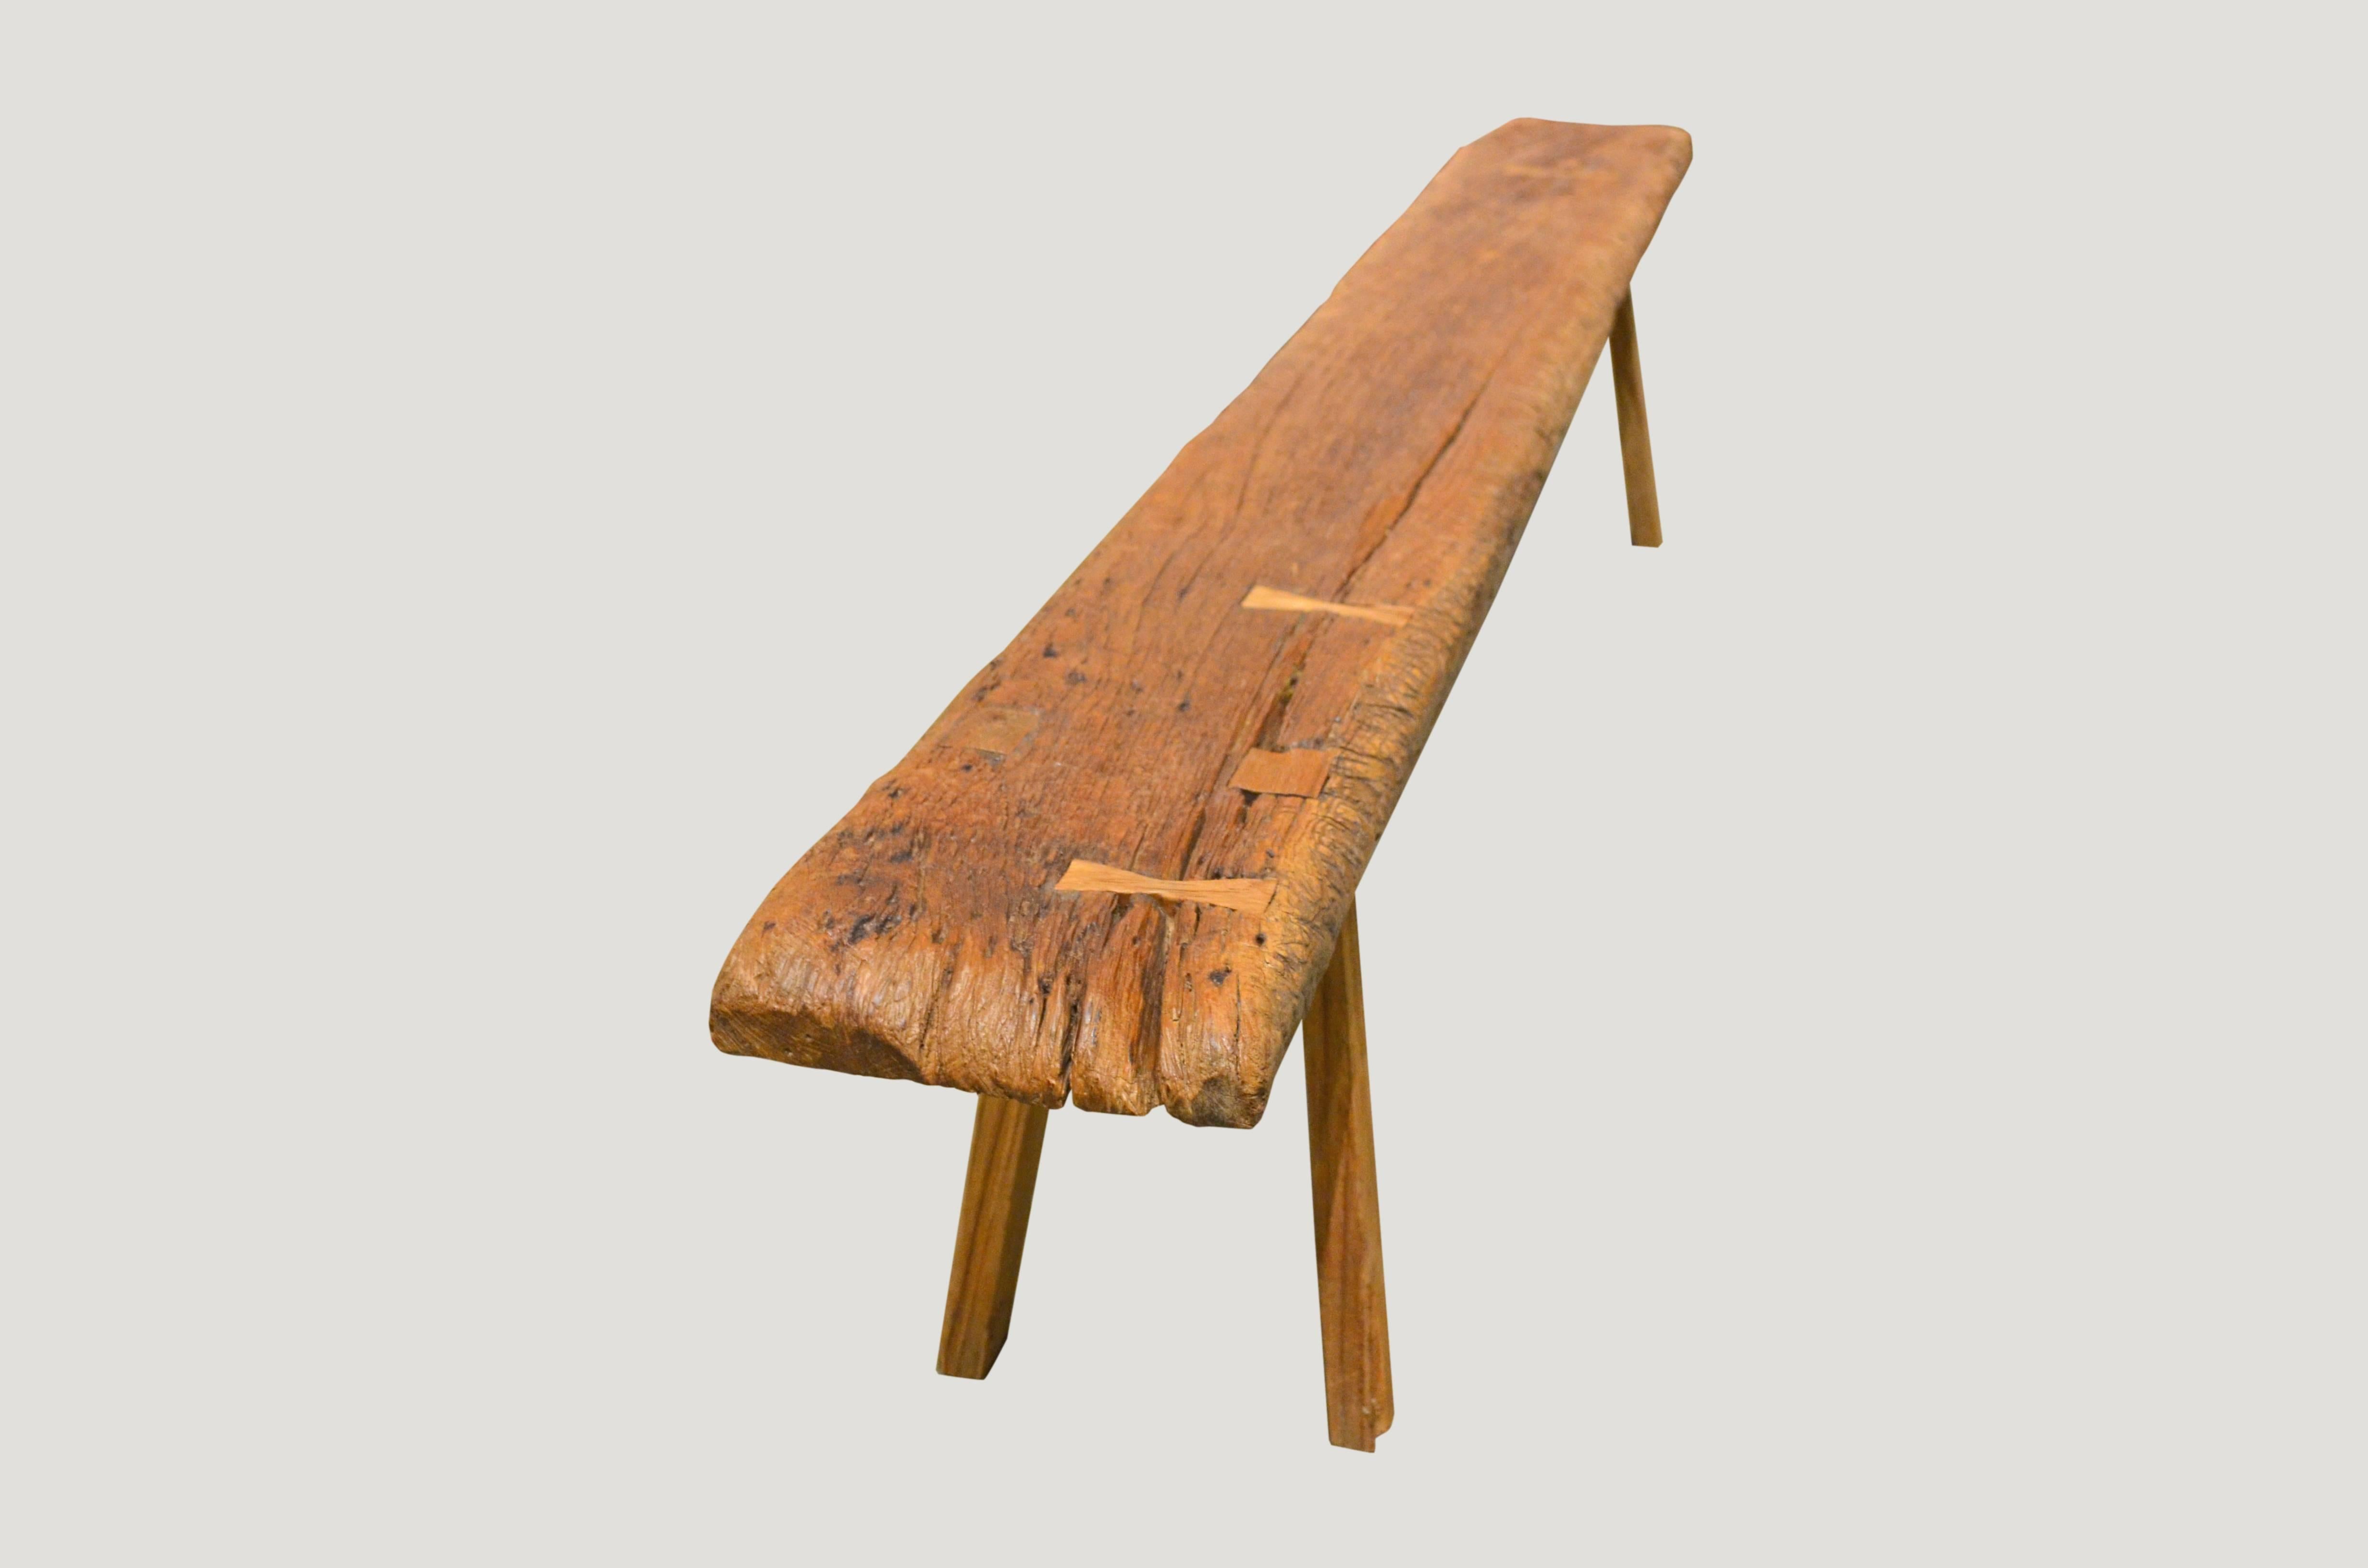 Antique single slab teak wood bench or coffee table with beautiful patina and added butterfly detail. Can also be used as a shelf.

This bench was sourced in the spirit of wabi-sabi, a Japanese philosophy that beauty can be found in imperfection